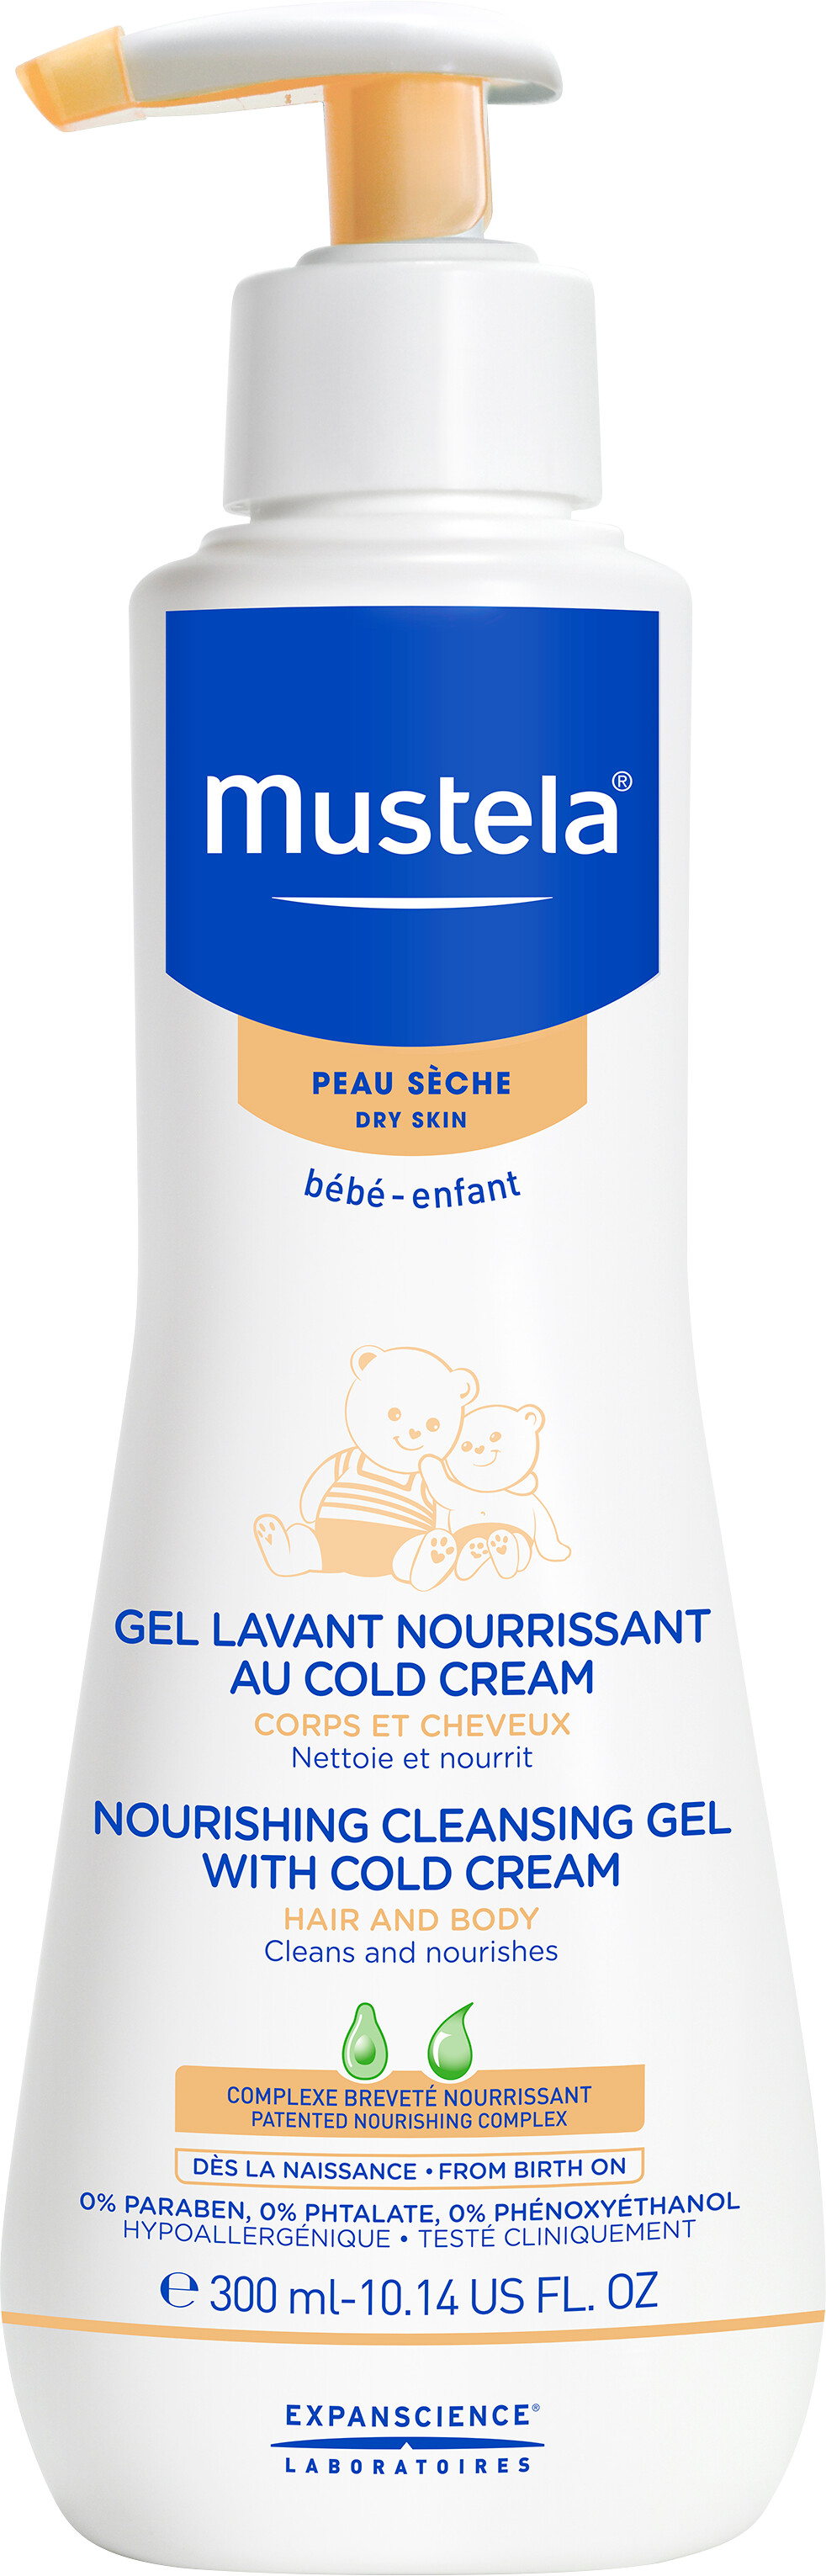 Mustela Nourishing Cleansing Gel with Cold Cream for Dry Skin 300ml